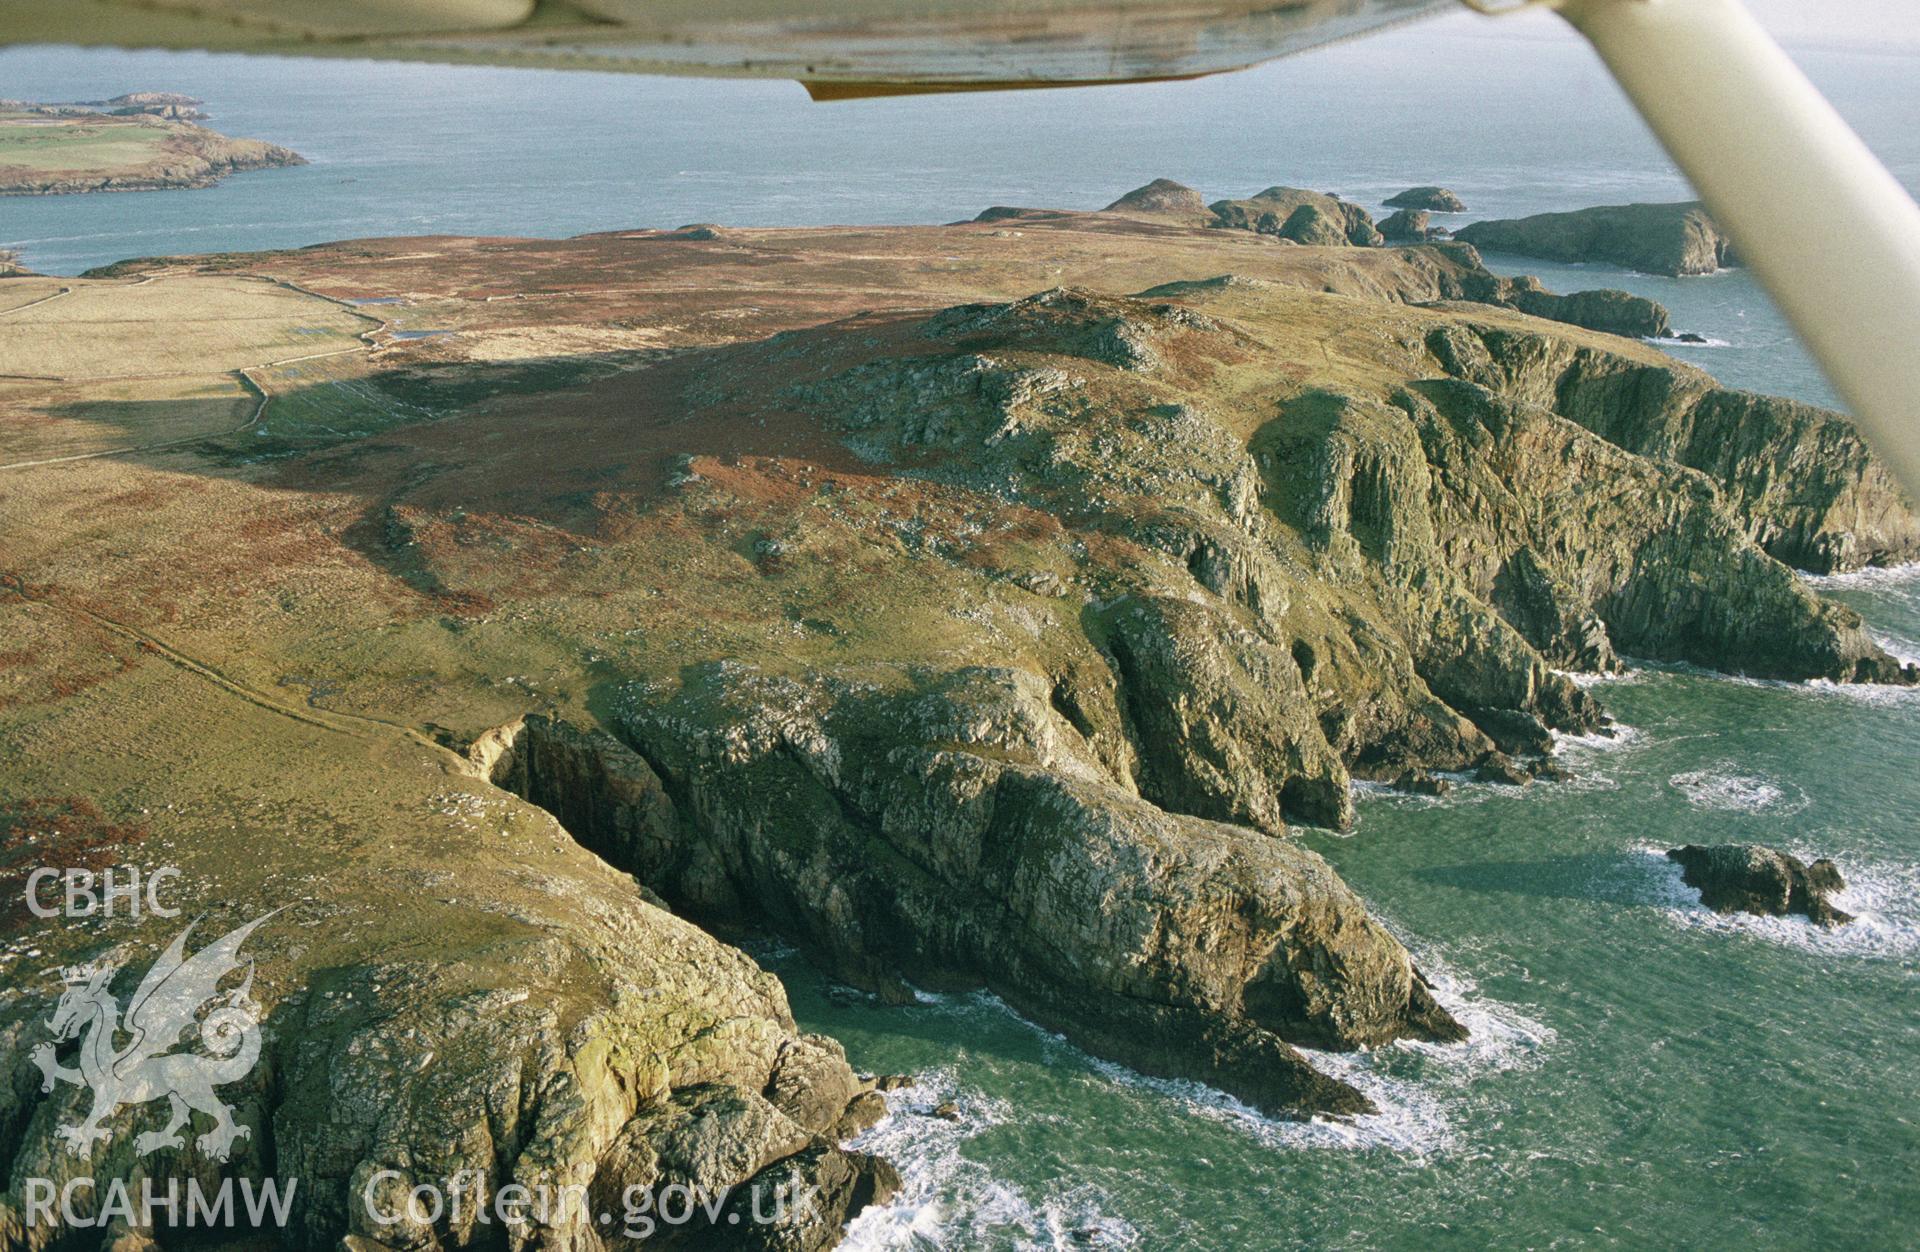 RCAHMW colour slide oblique aerial photograph of reclict field boundary features at Ogiof Colomenod, St Davids and the Cathedral Close, taken by C.R. Musson, 16/01/94